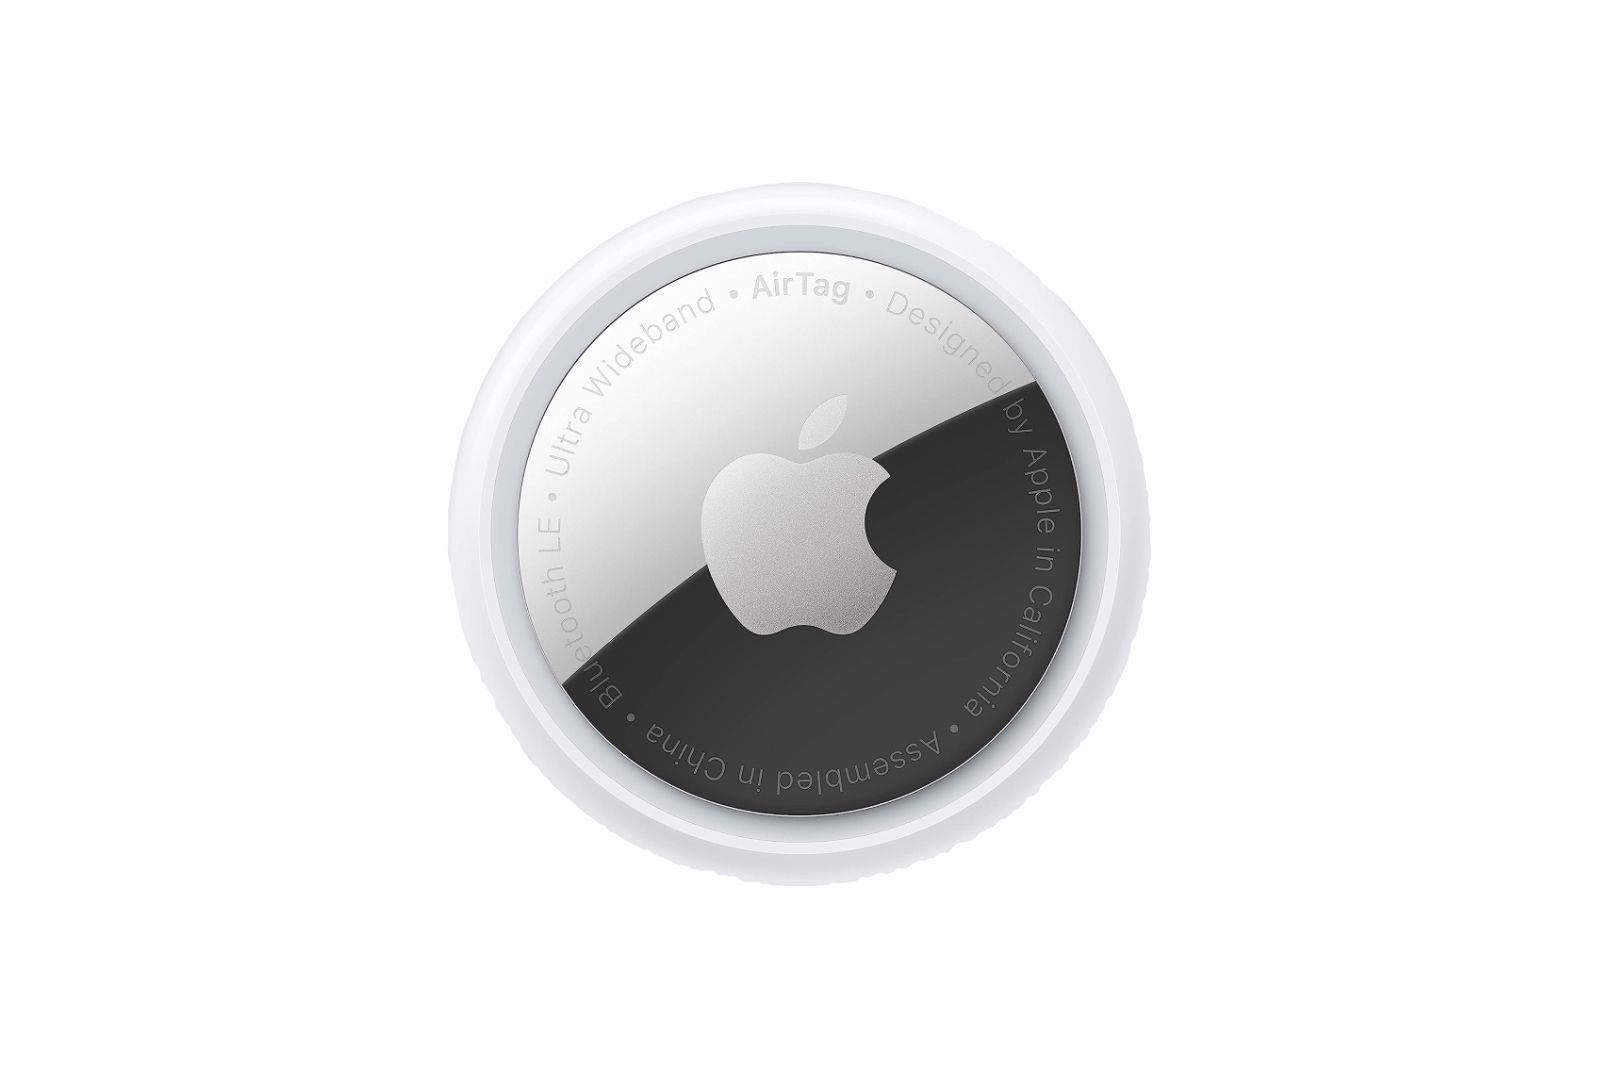 A circular silver and white tracker with an Apple logo on the back.